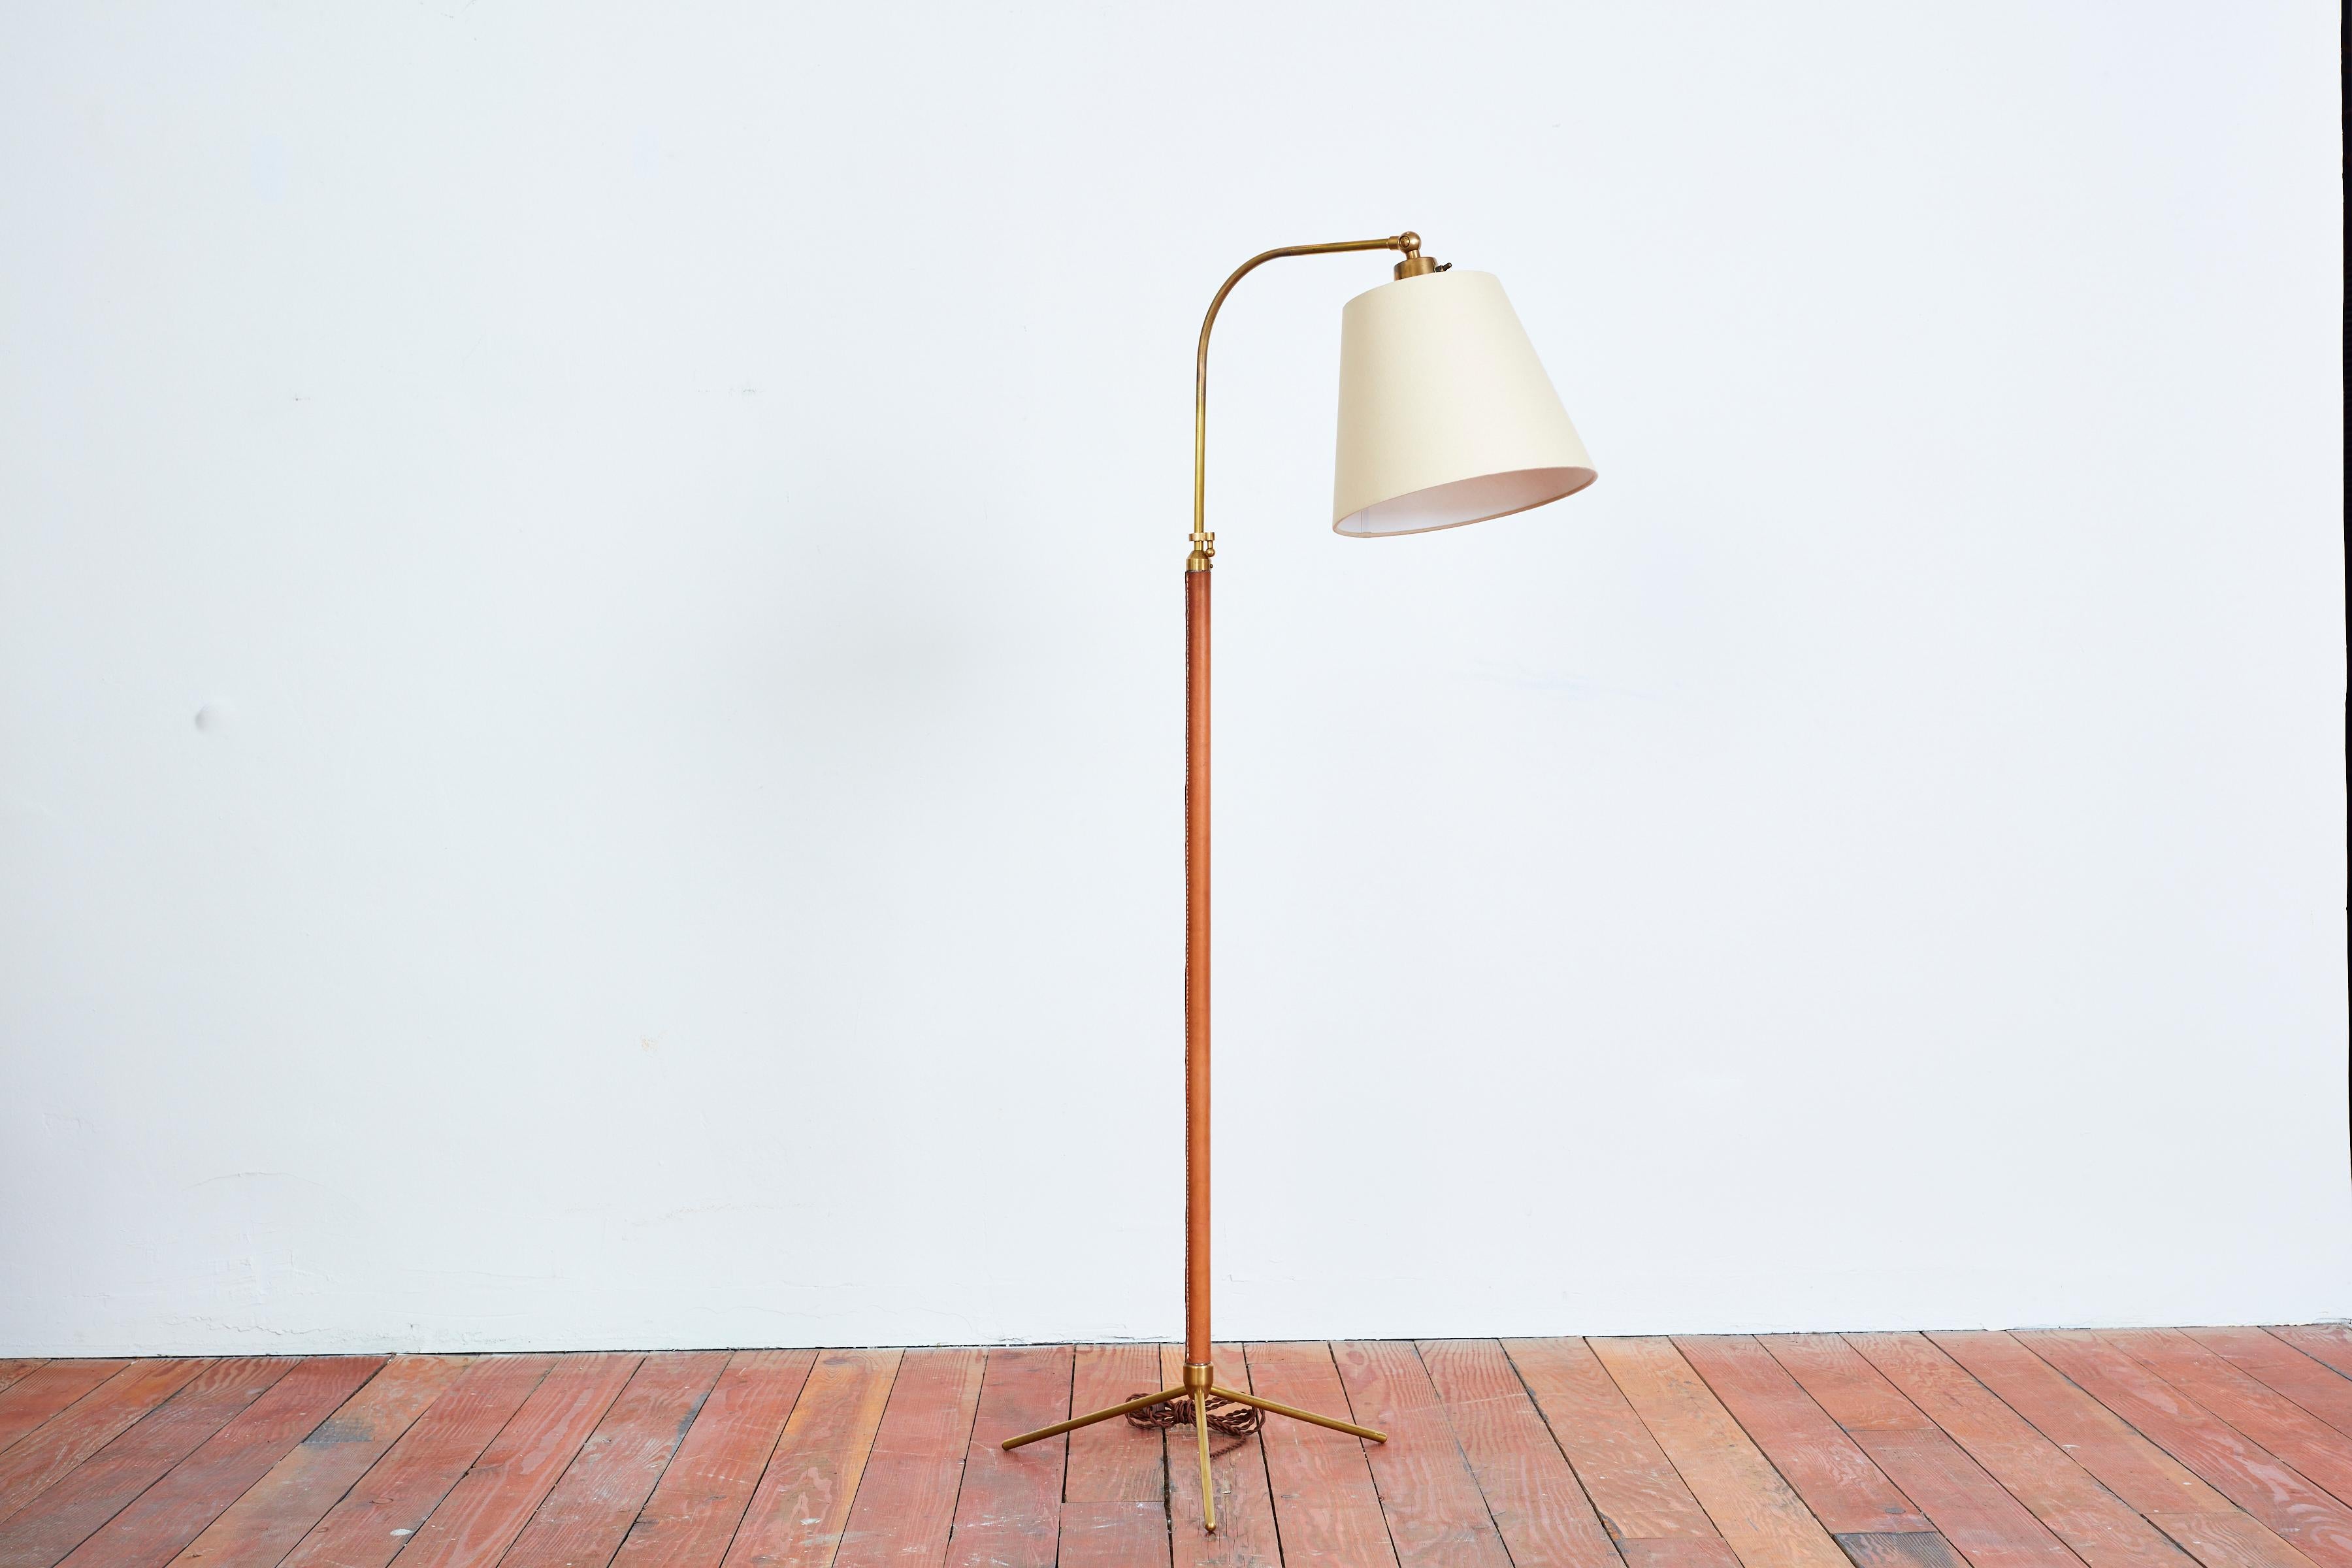 Handsome French floor lamp by Jacques Adnet with hand-stitched camel brown leather, contrast stitching, brass tripod base and new silk shade. 
Newly rewired. 
Height extends from 48” - 64.5”.